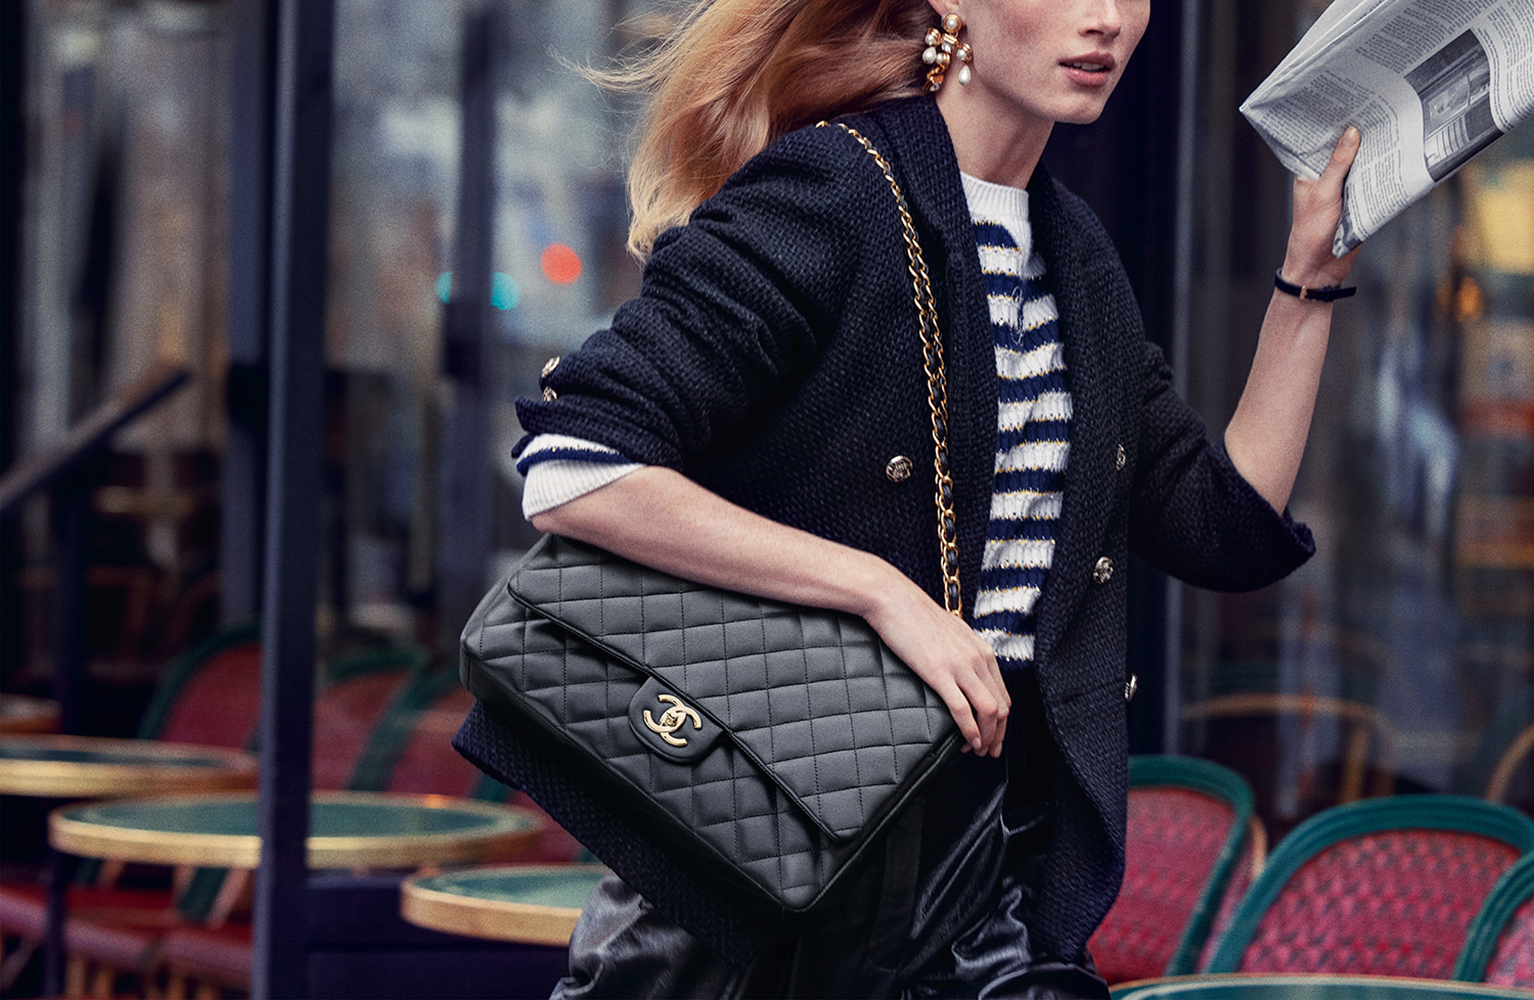 28 Iconic and Fashionable Chain Bags Worth Having  Chanel classic flap bag,  Chanel street style, Chanel classic